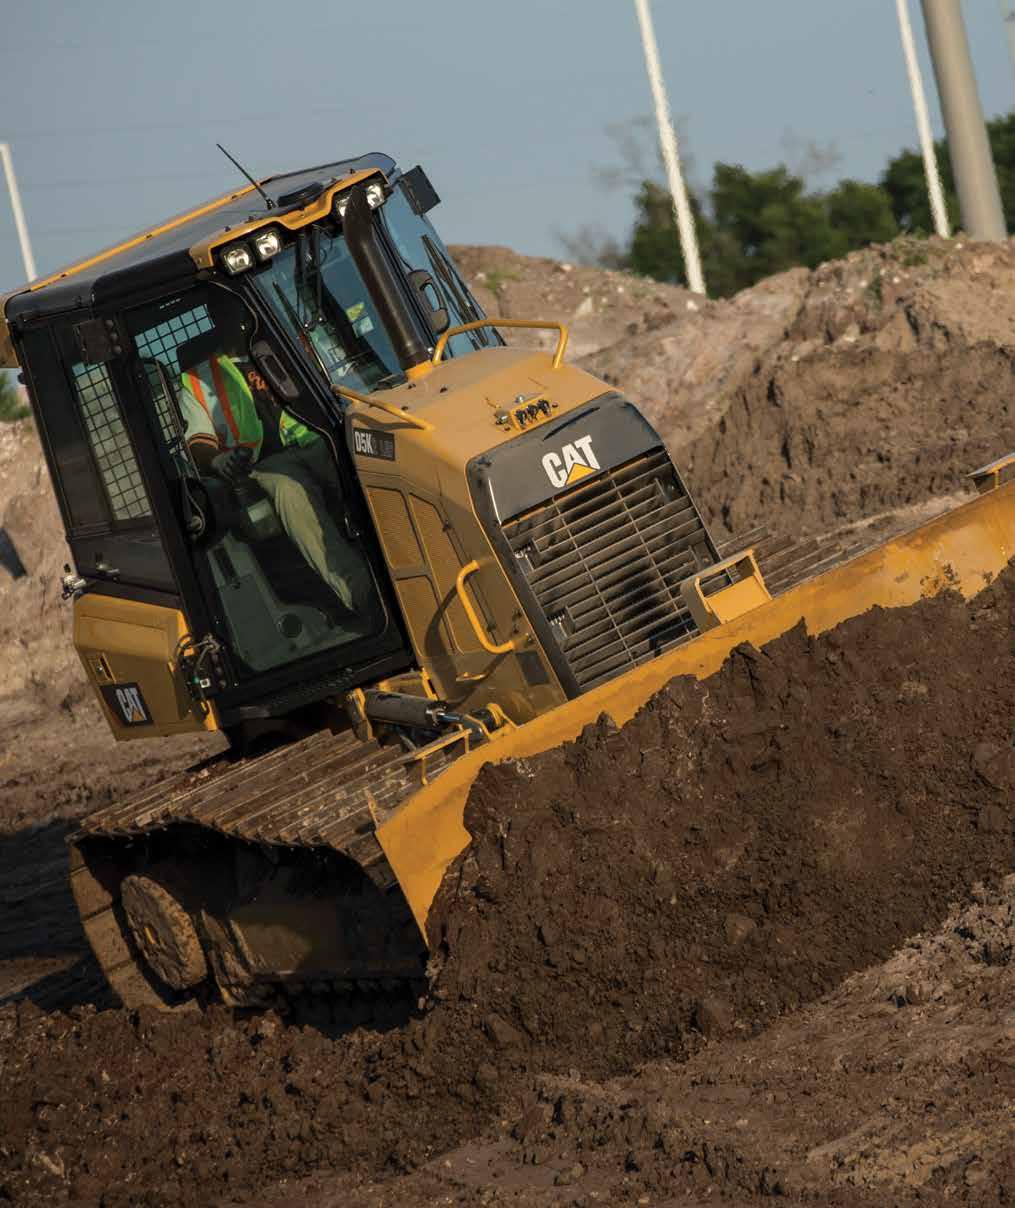 Cat Dozers feature class-leading power, ergonomic joystick controls and integrated grade-slope controls for fast,